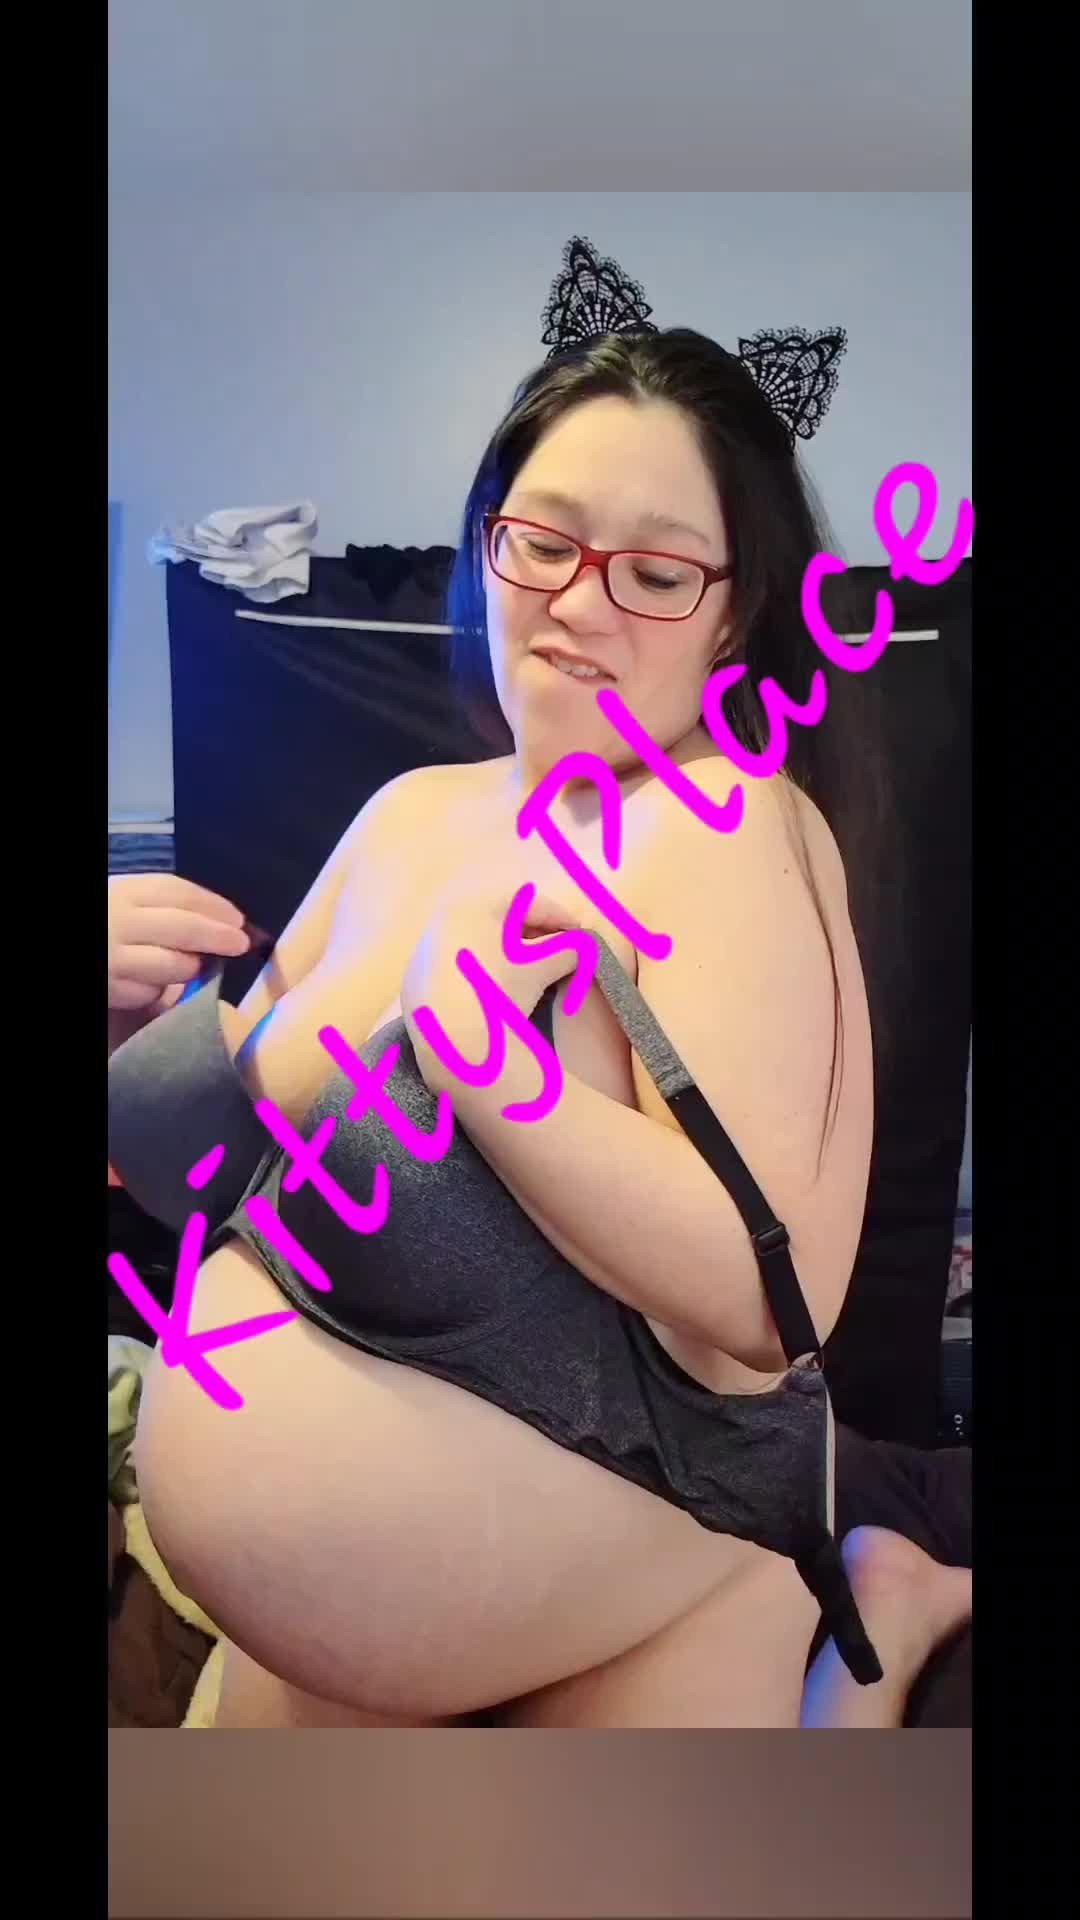 Video post by KittysPlace